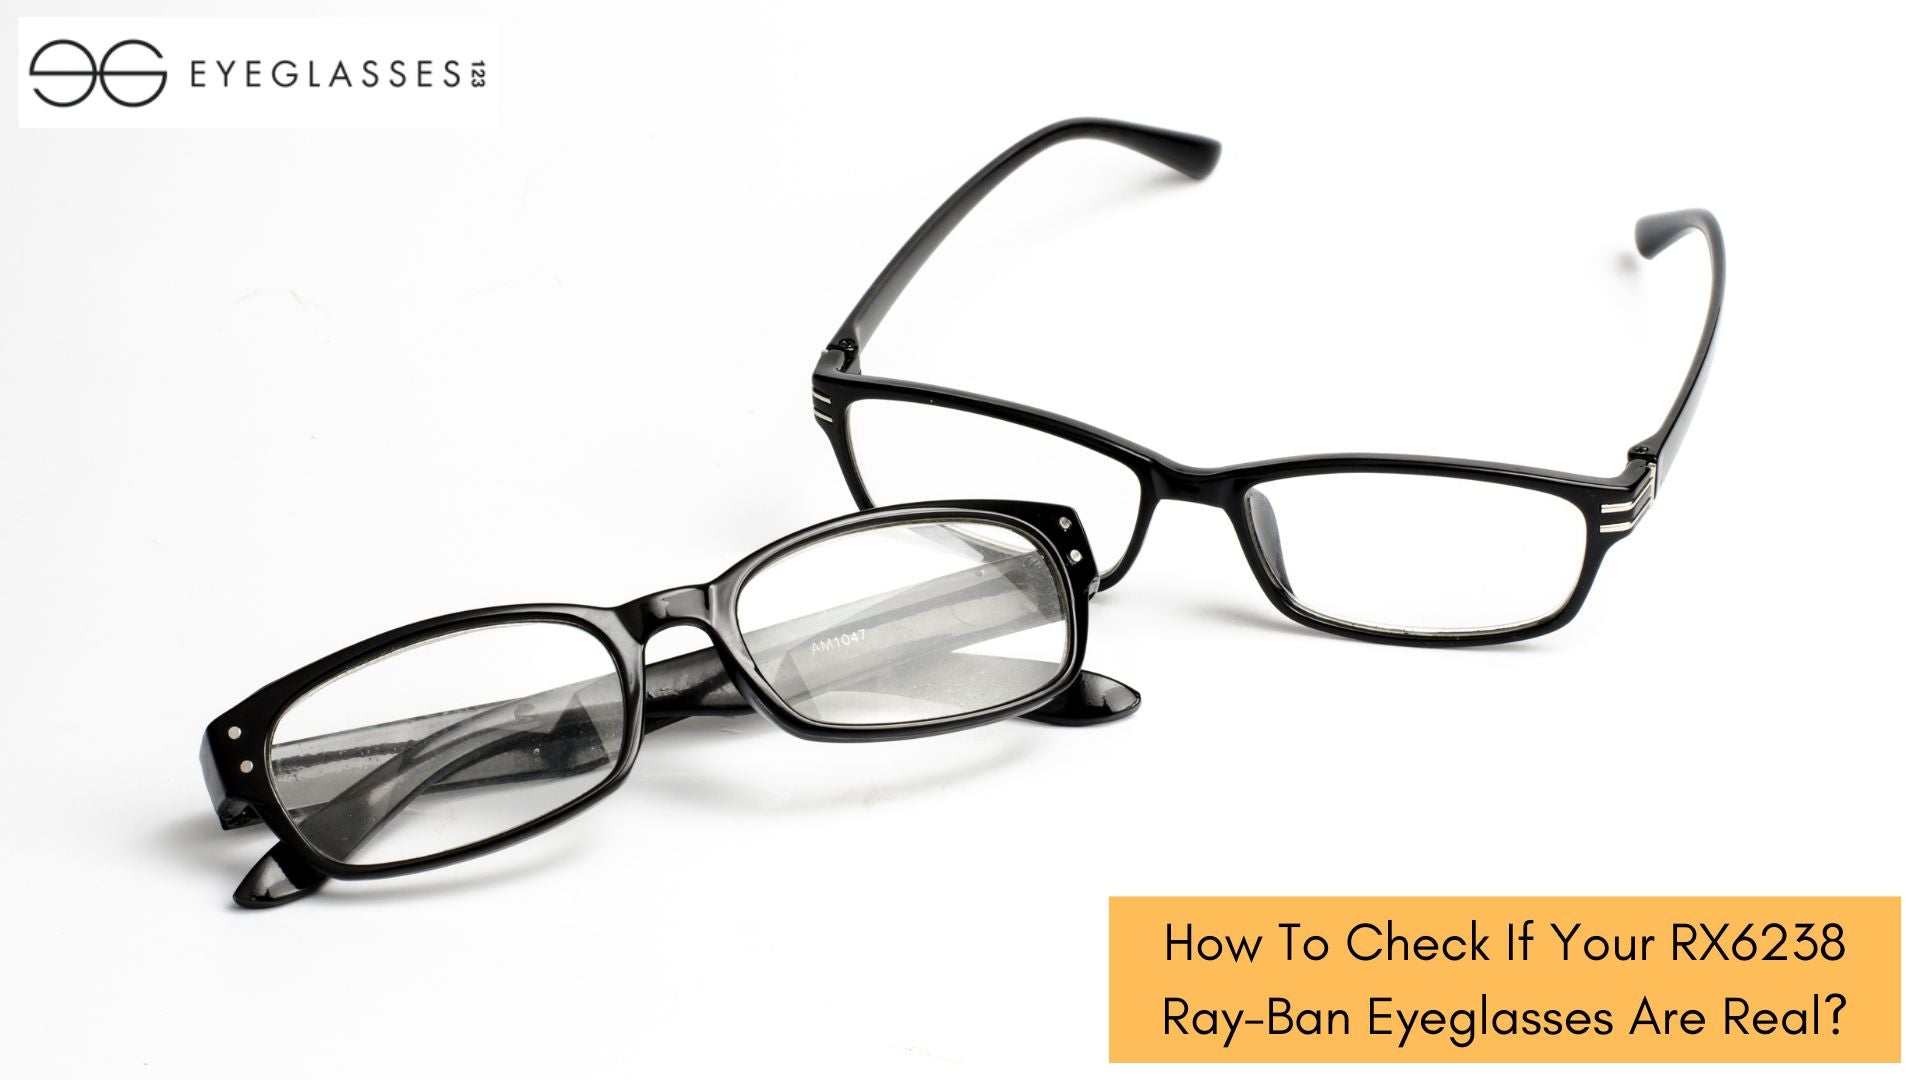 How To Check If Your RX6238 Ray-Ban Eyeglasses Are Real?